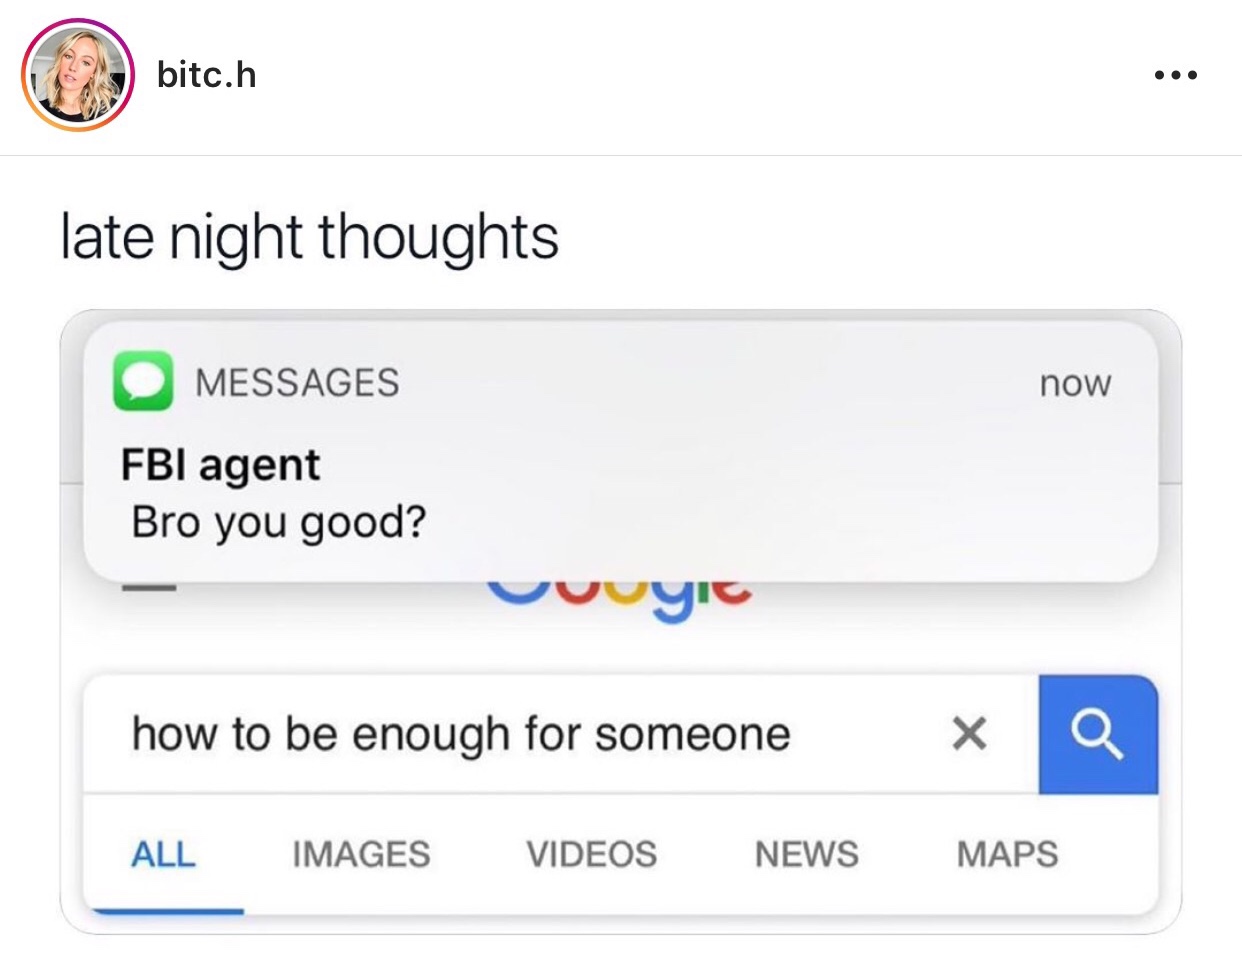 fbi you good bro - bitc.h bitch late night thoughts Messages now Fbi agent Bro you good? Vuuyic how to be enough for someone All Images Videos News Maps